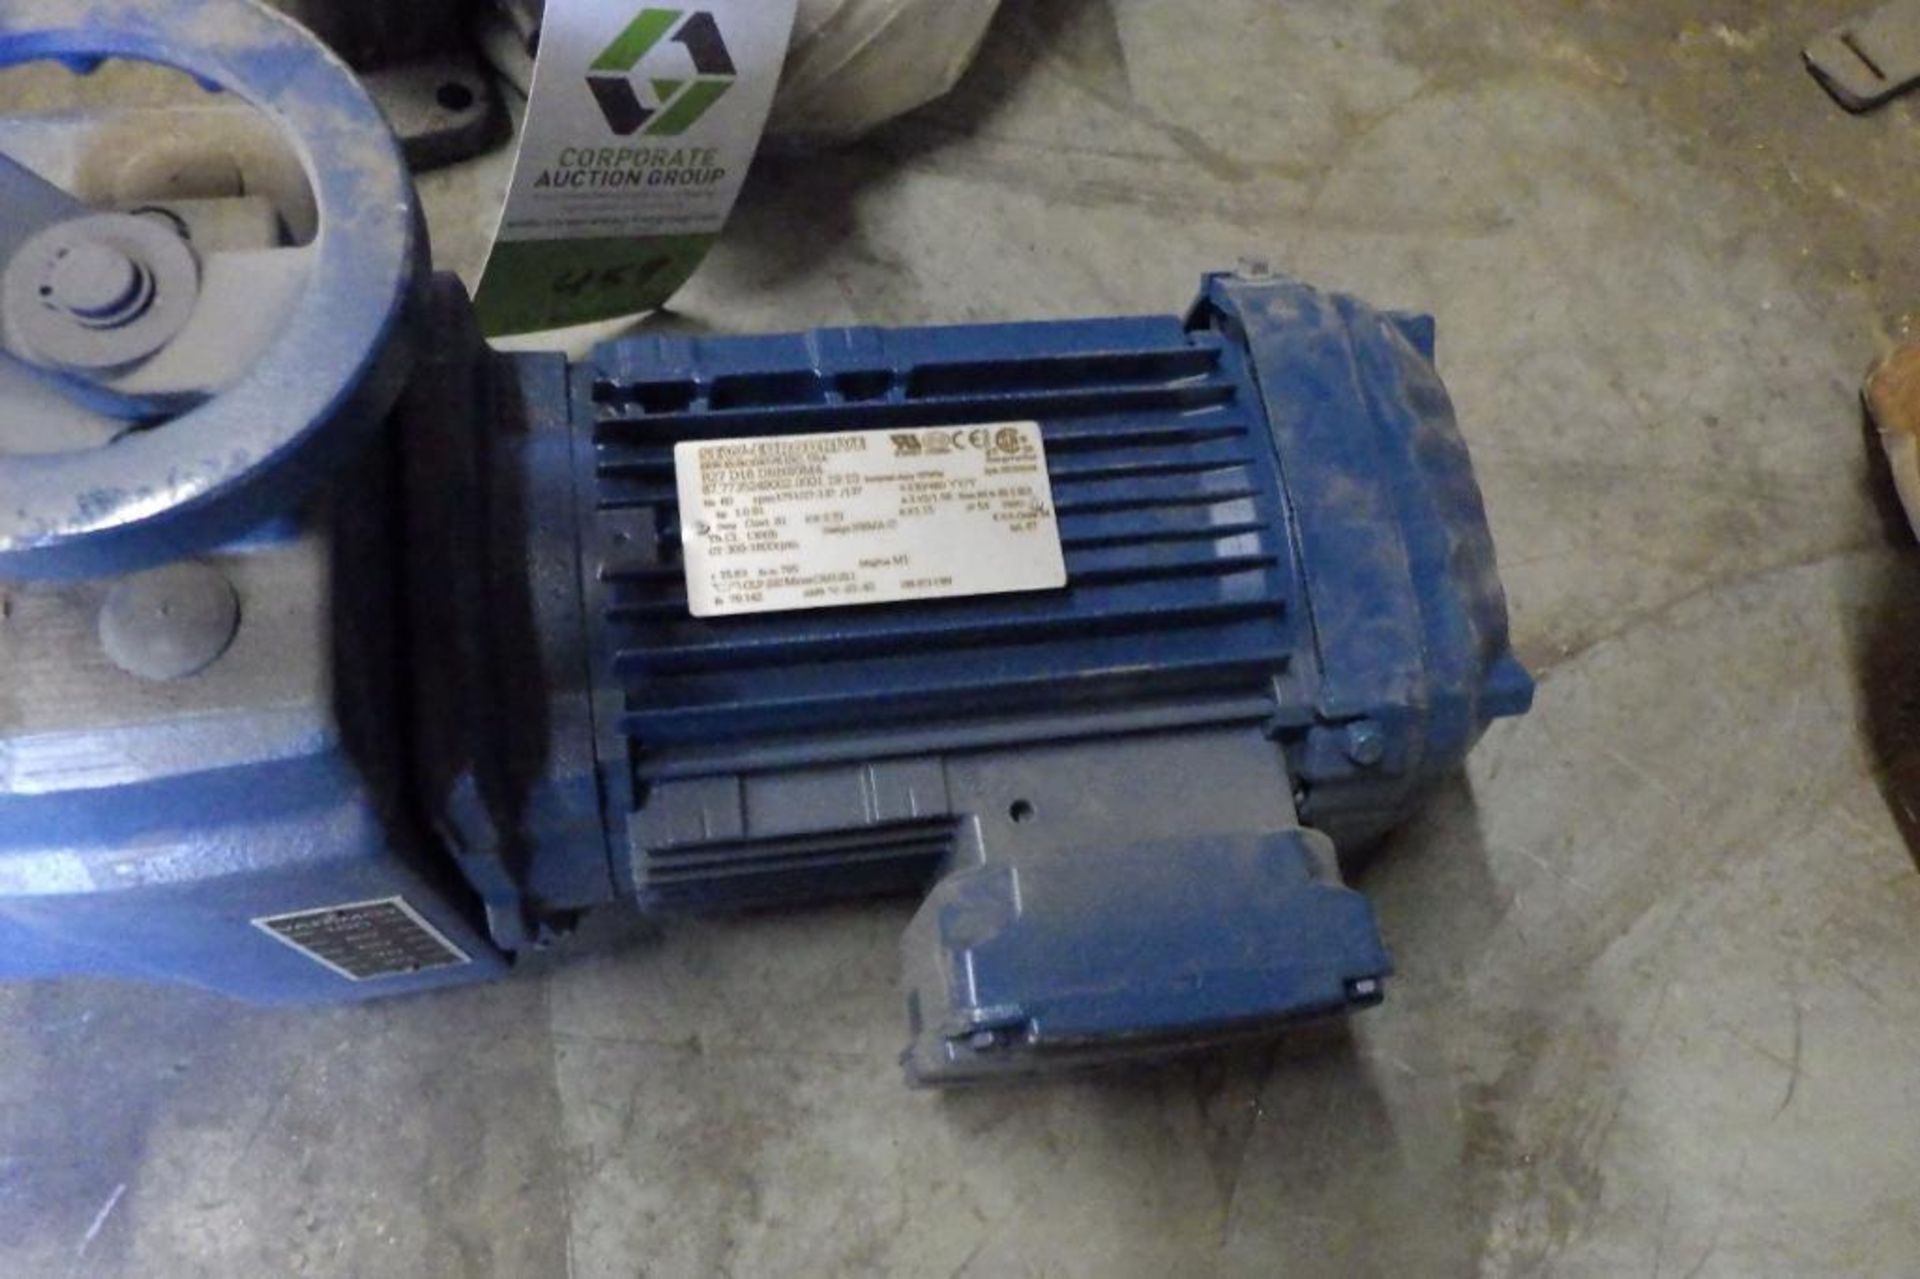 New SEW Eurodrive motor and gearbox - Image 6 of 7